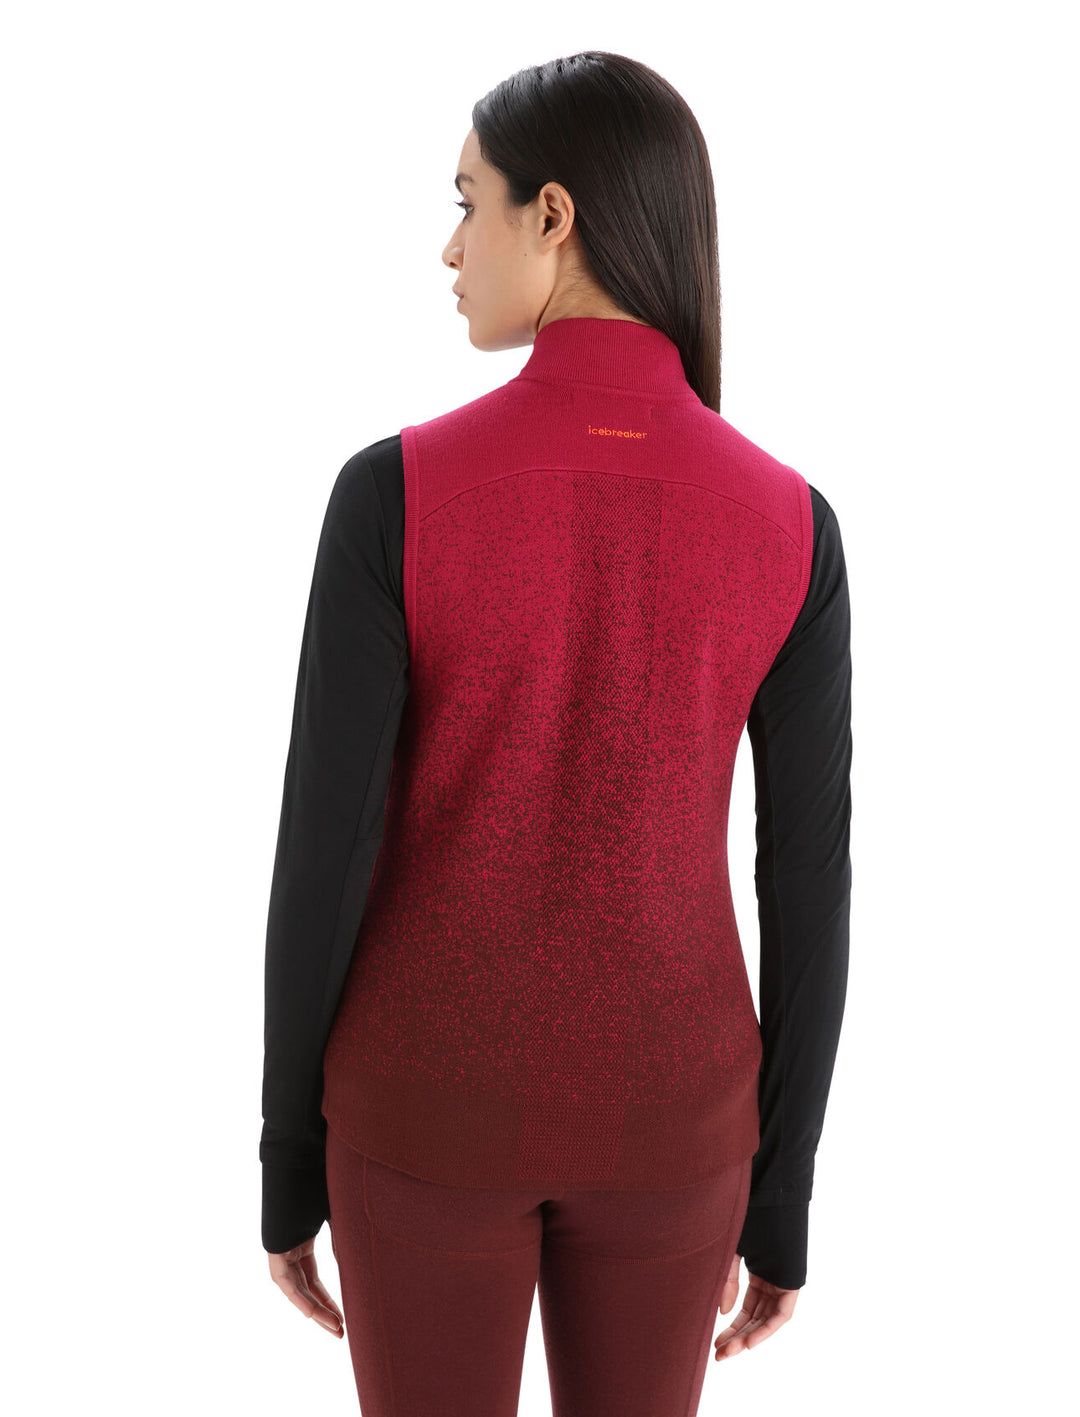 Womens Zoneknit Insulated Vest Into The Deep - Cherry/Espresso